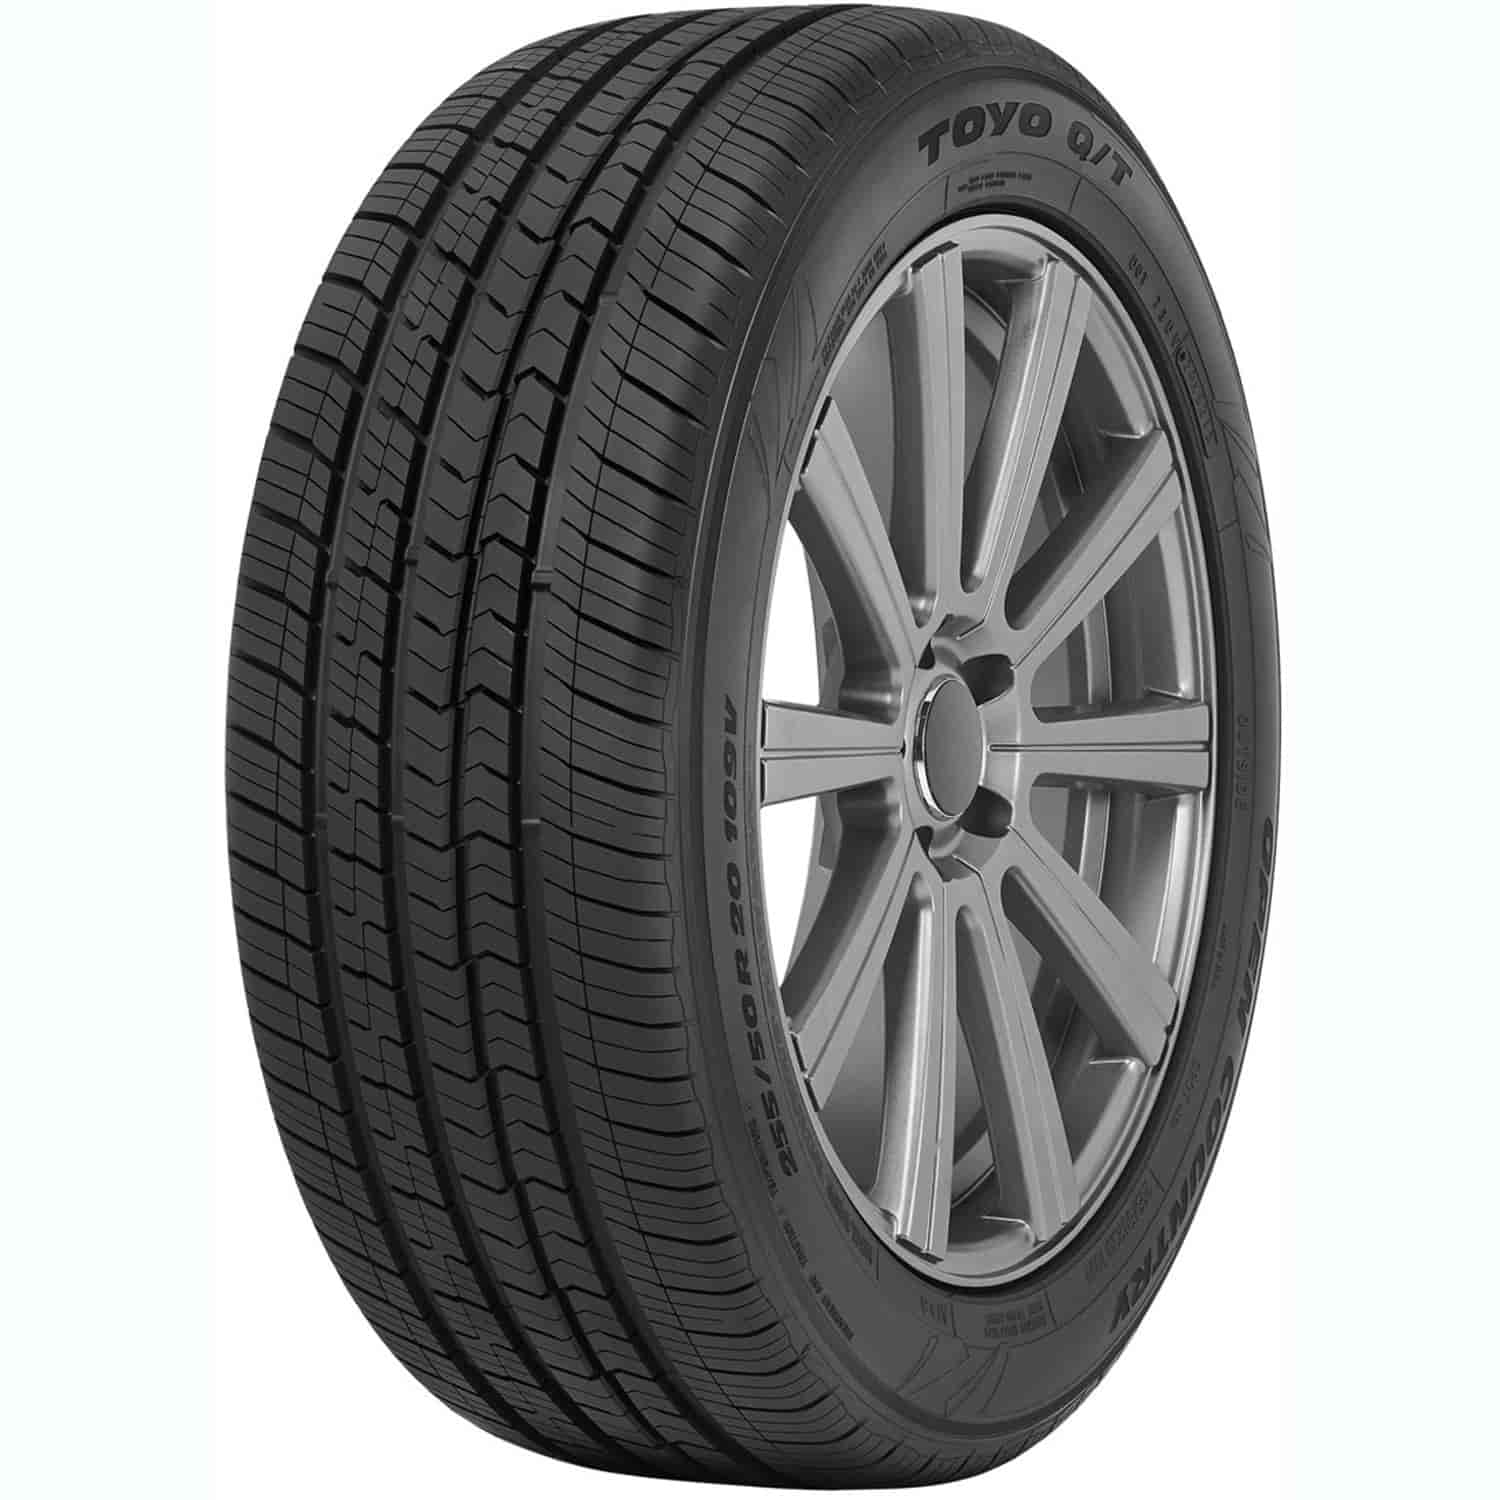 OPEN COUNTRY Q/T 265/60R18 110V